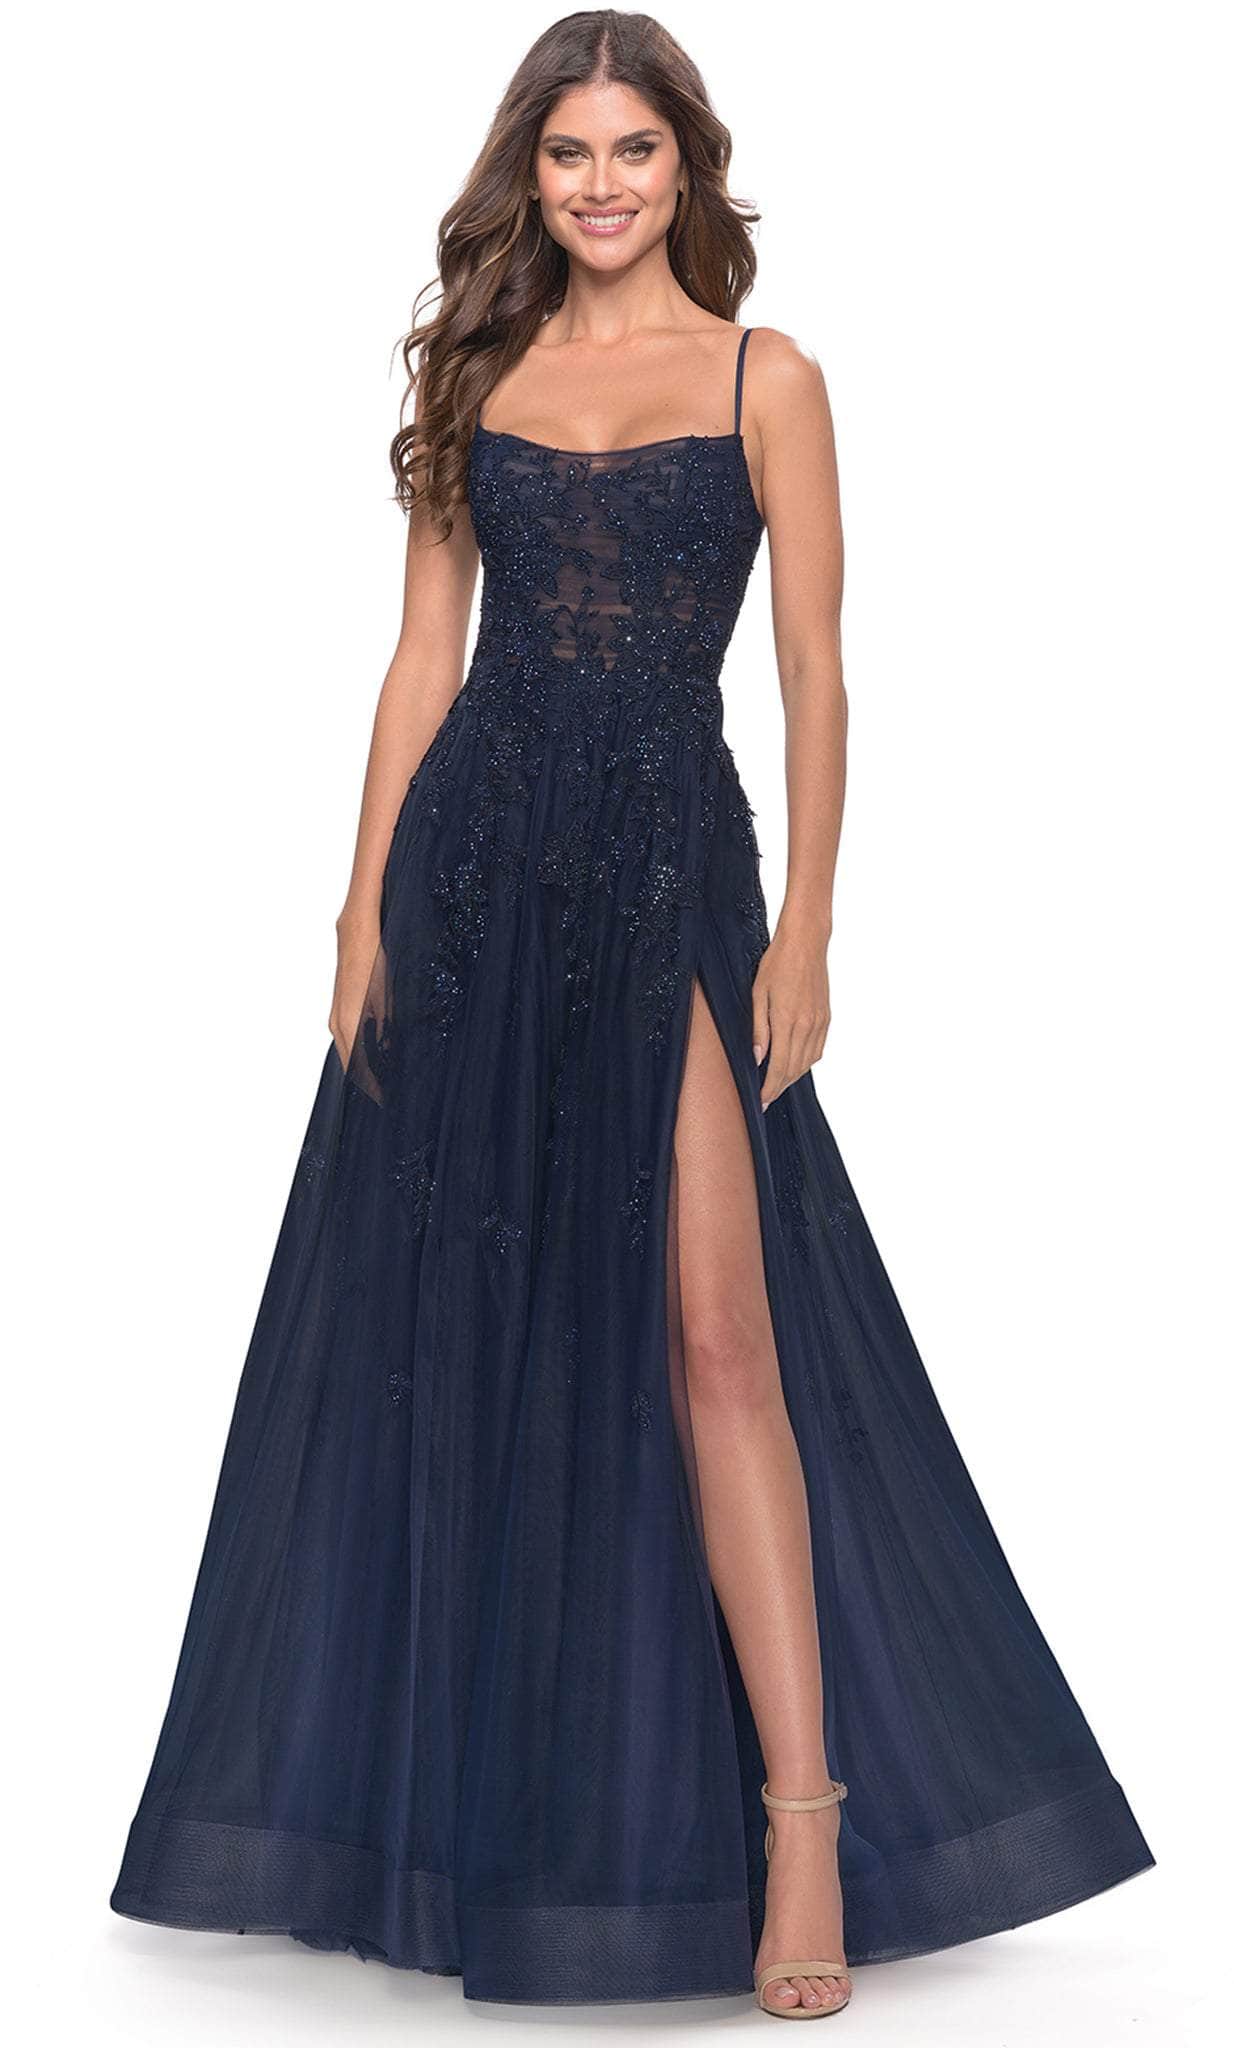 Image of La Femme 31381 - Lace-Up Open Back Beaded Tulle Gown